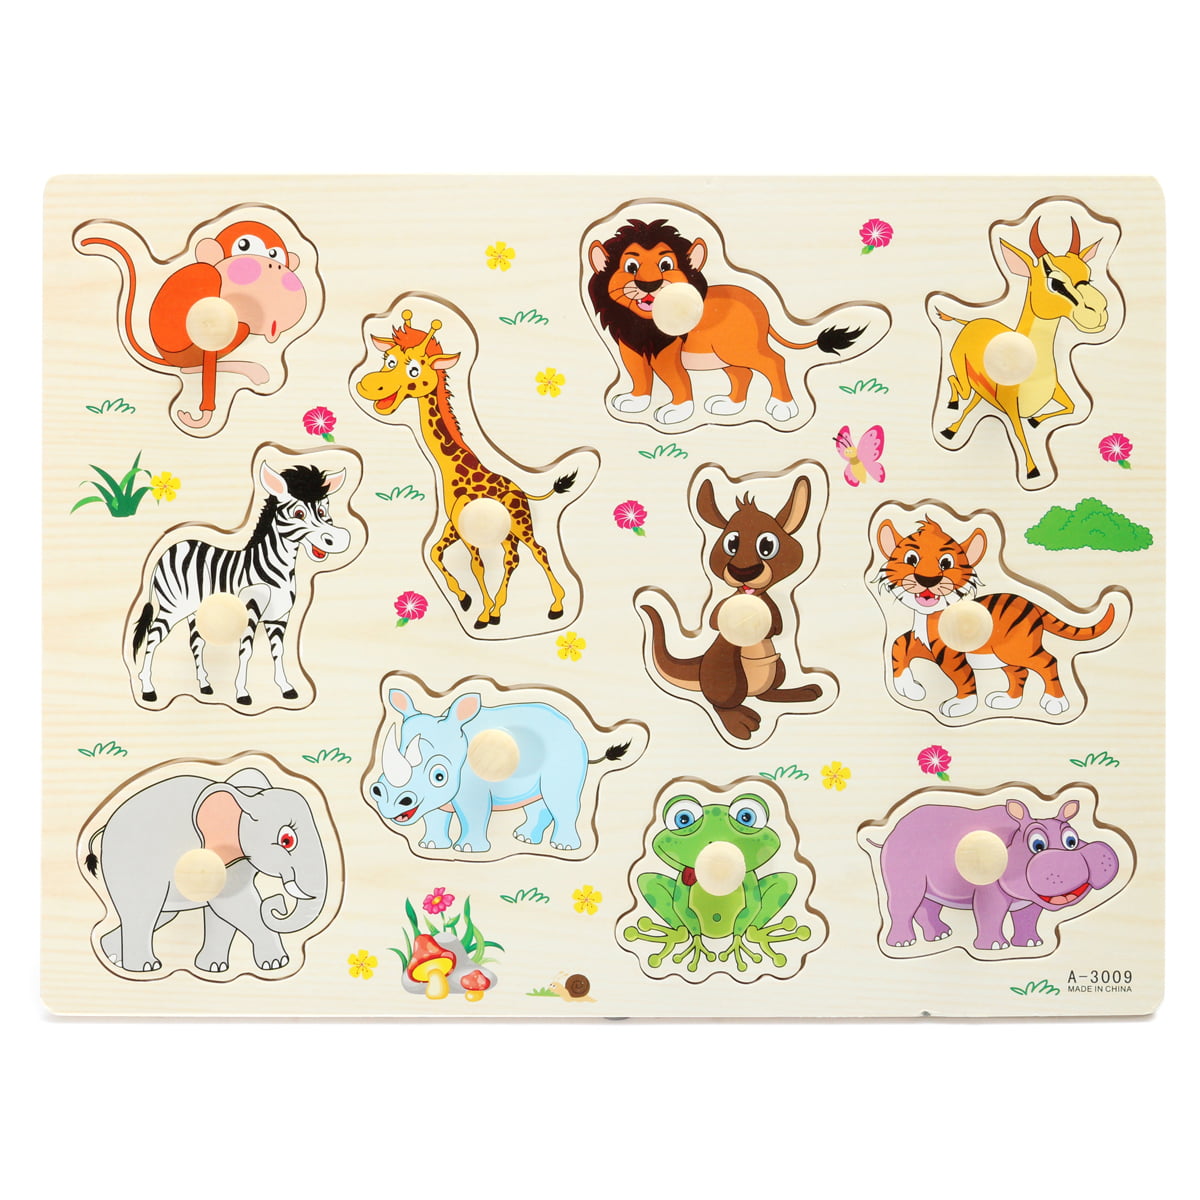 Wooden Wildlife Zoo Animals Peg Puzzles Jigsaws Kids Early Learning Toy Gift 